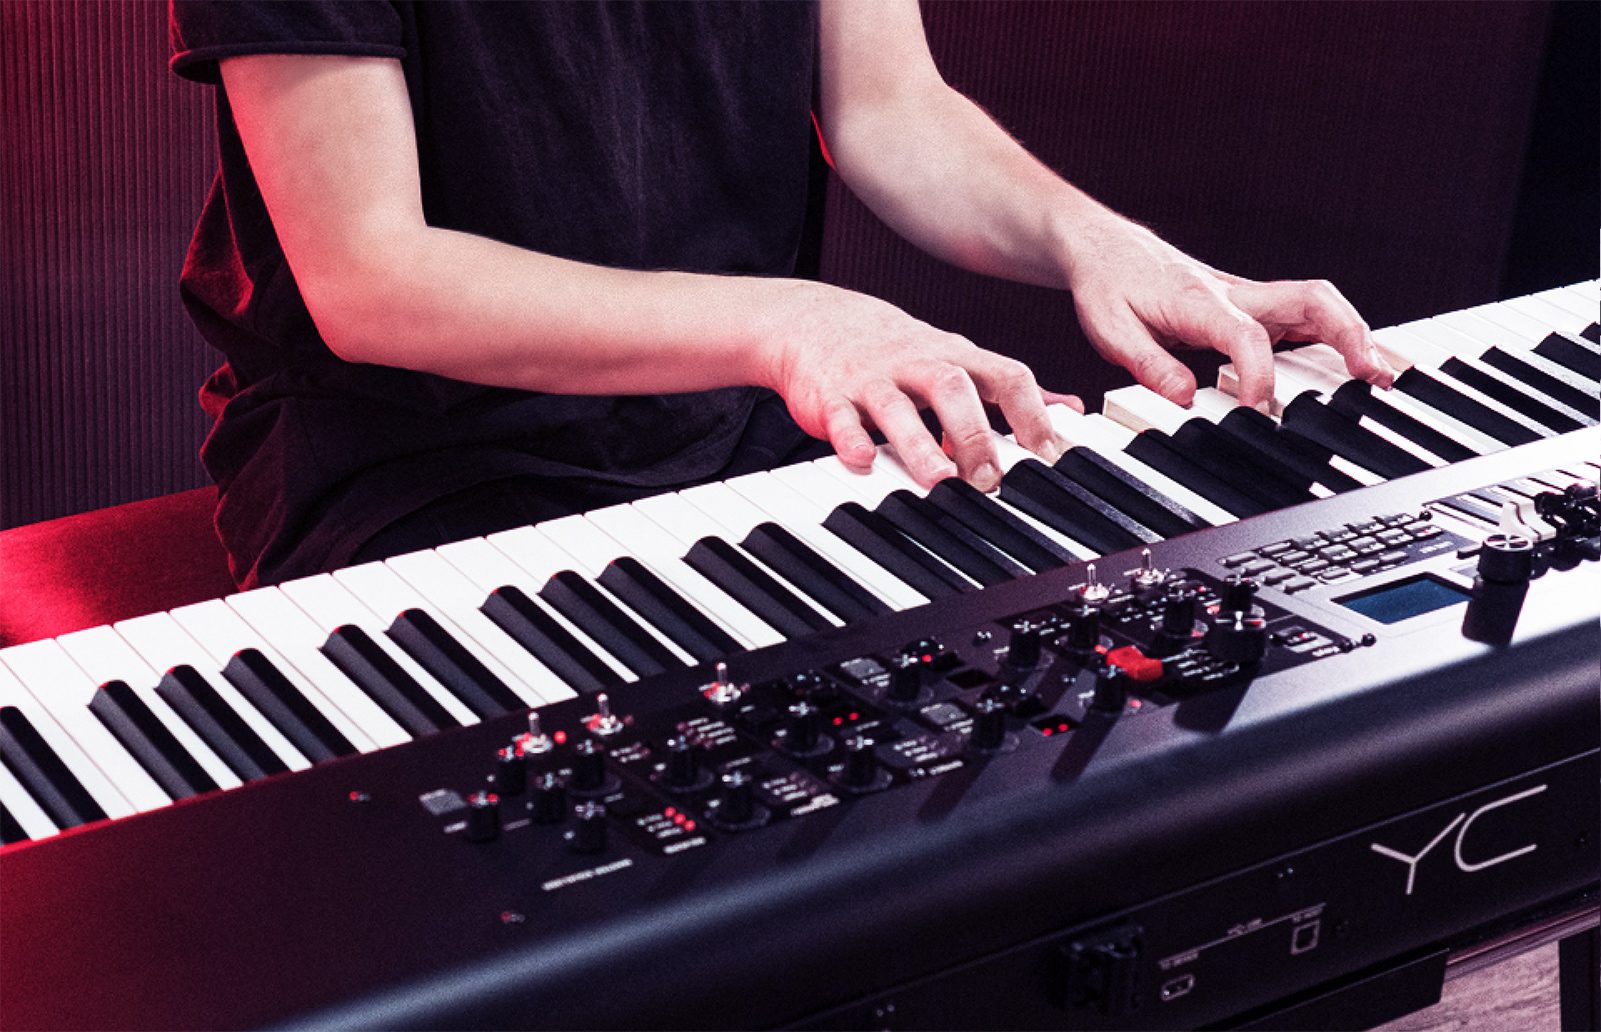 YC Series – YC61, YC73 and YC88 - Overview - Stage Keyboards 